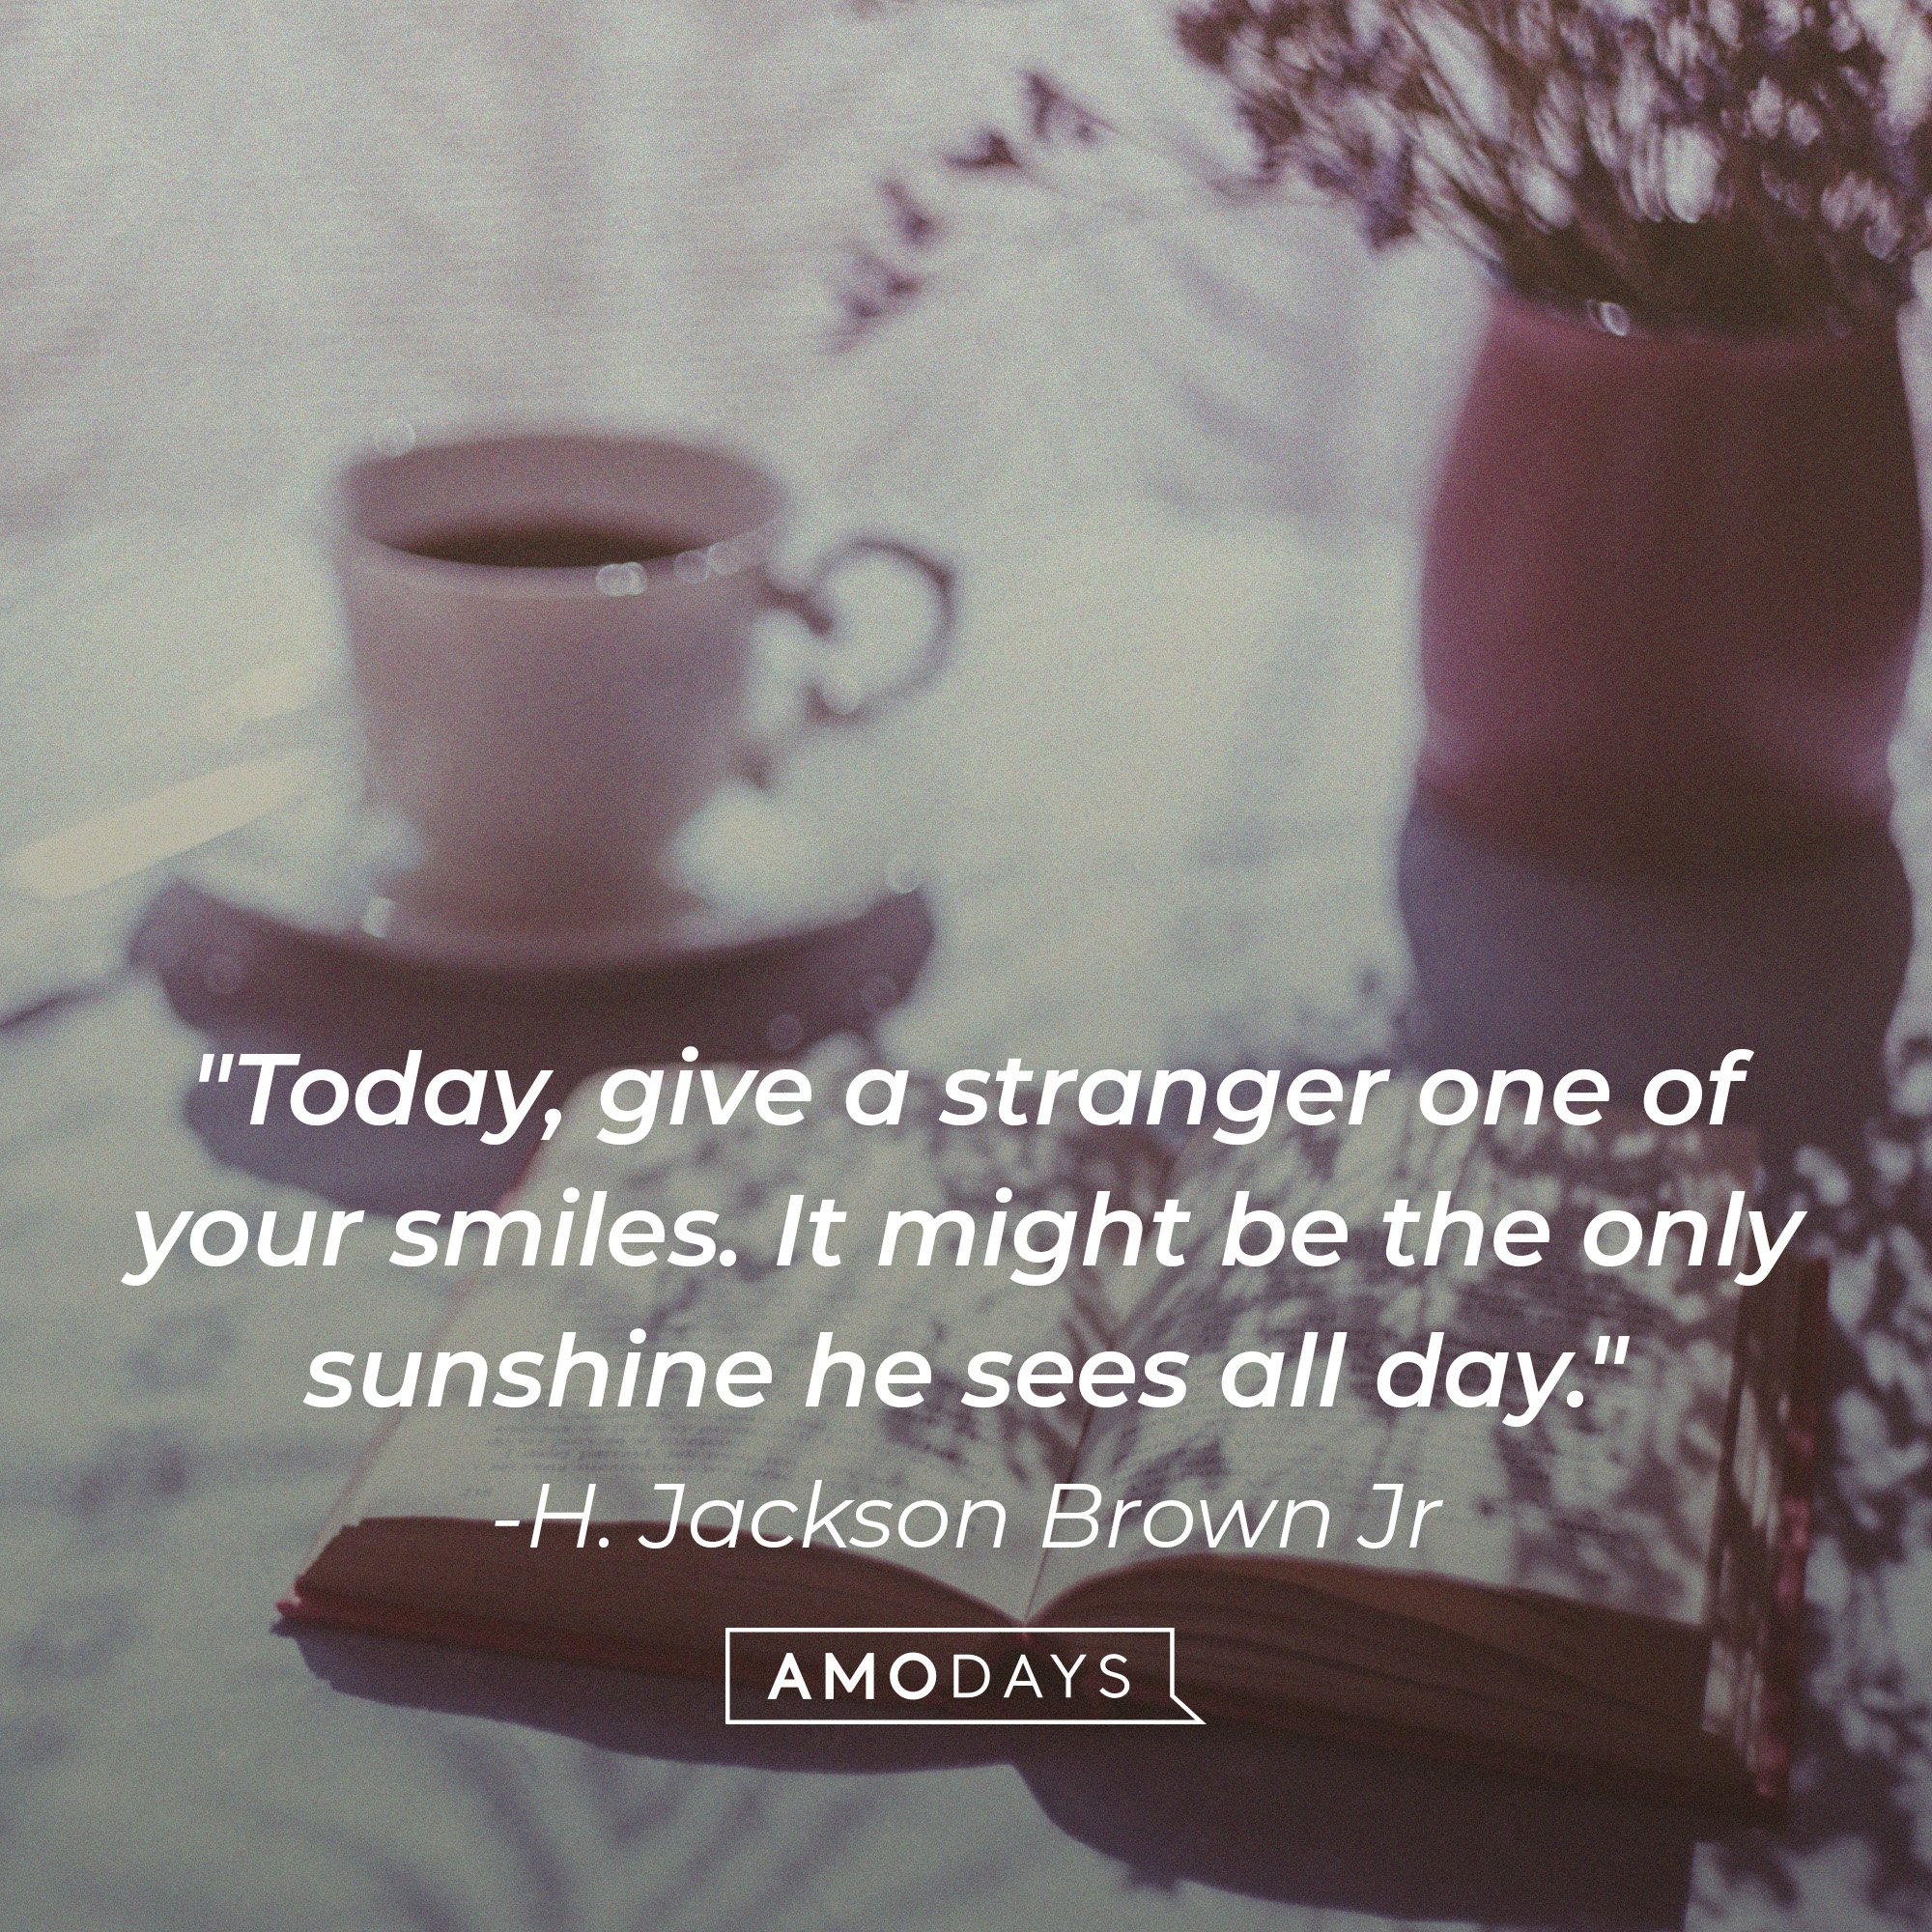 H. Jackson Brown's quote: " Today, give a stranger one of your smiles. It might be the only sunshine he sees all day." | Image: AmoDays 